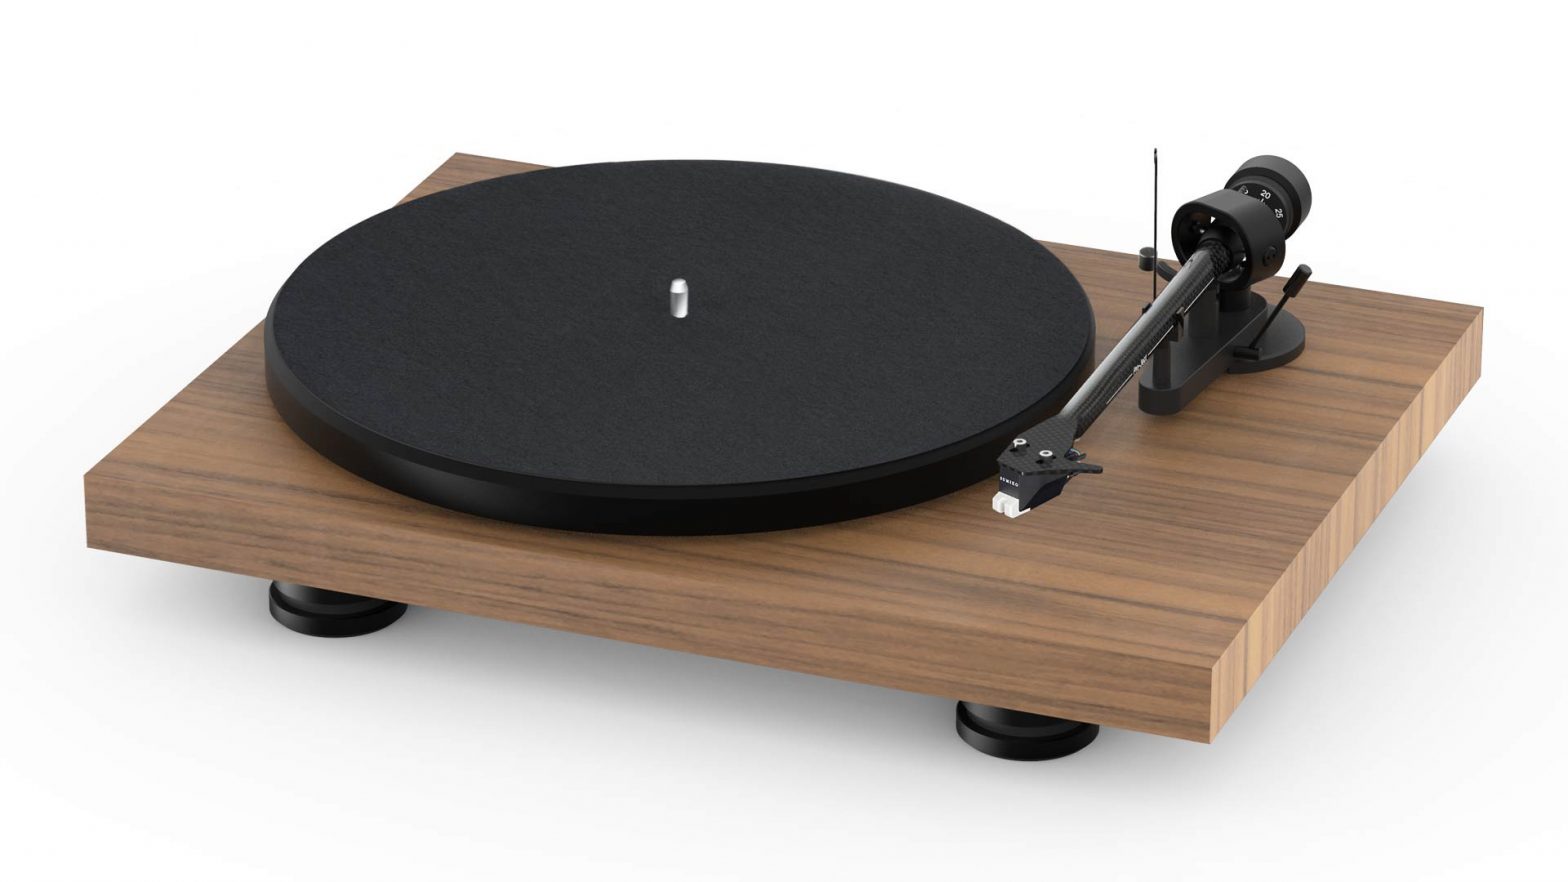 Pro-Ject Debut PRO Audio System User Guide